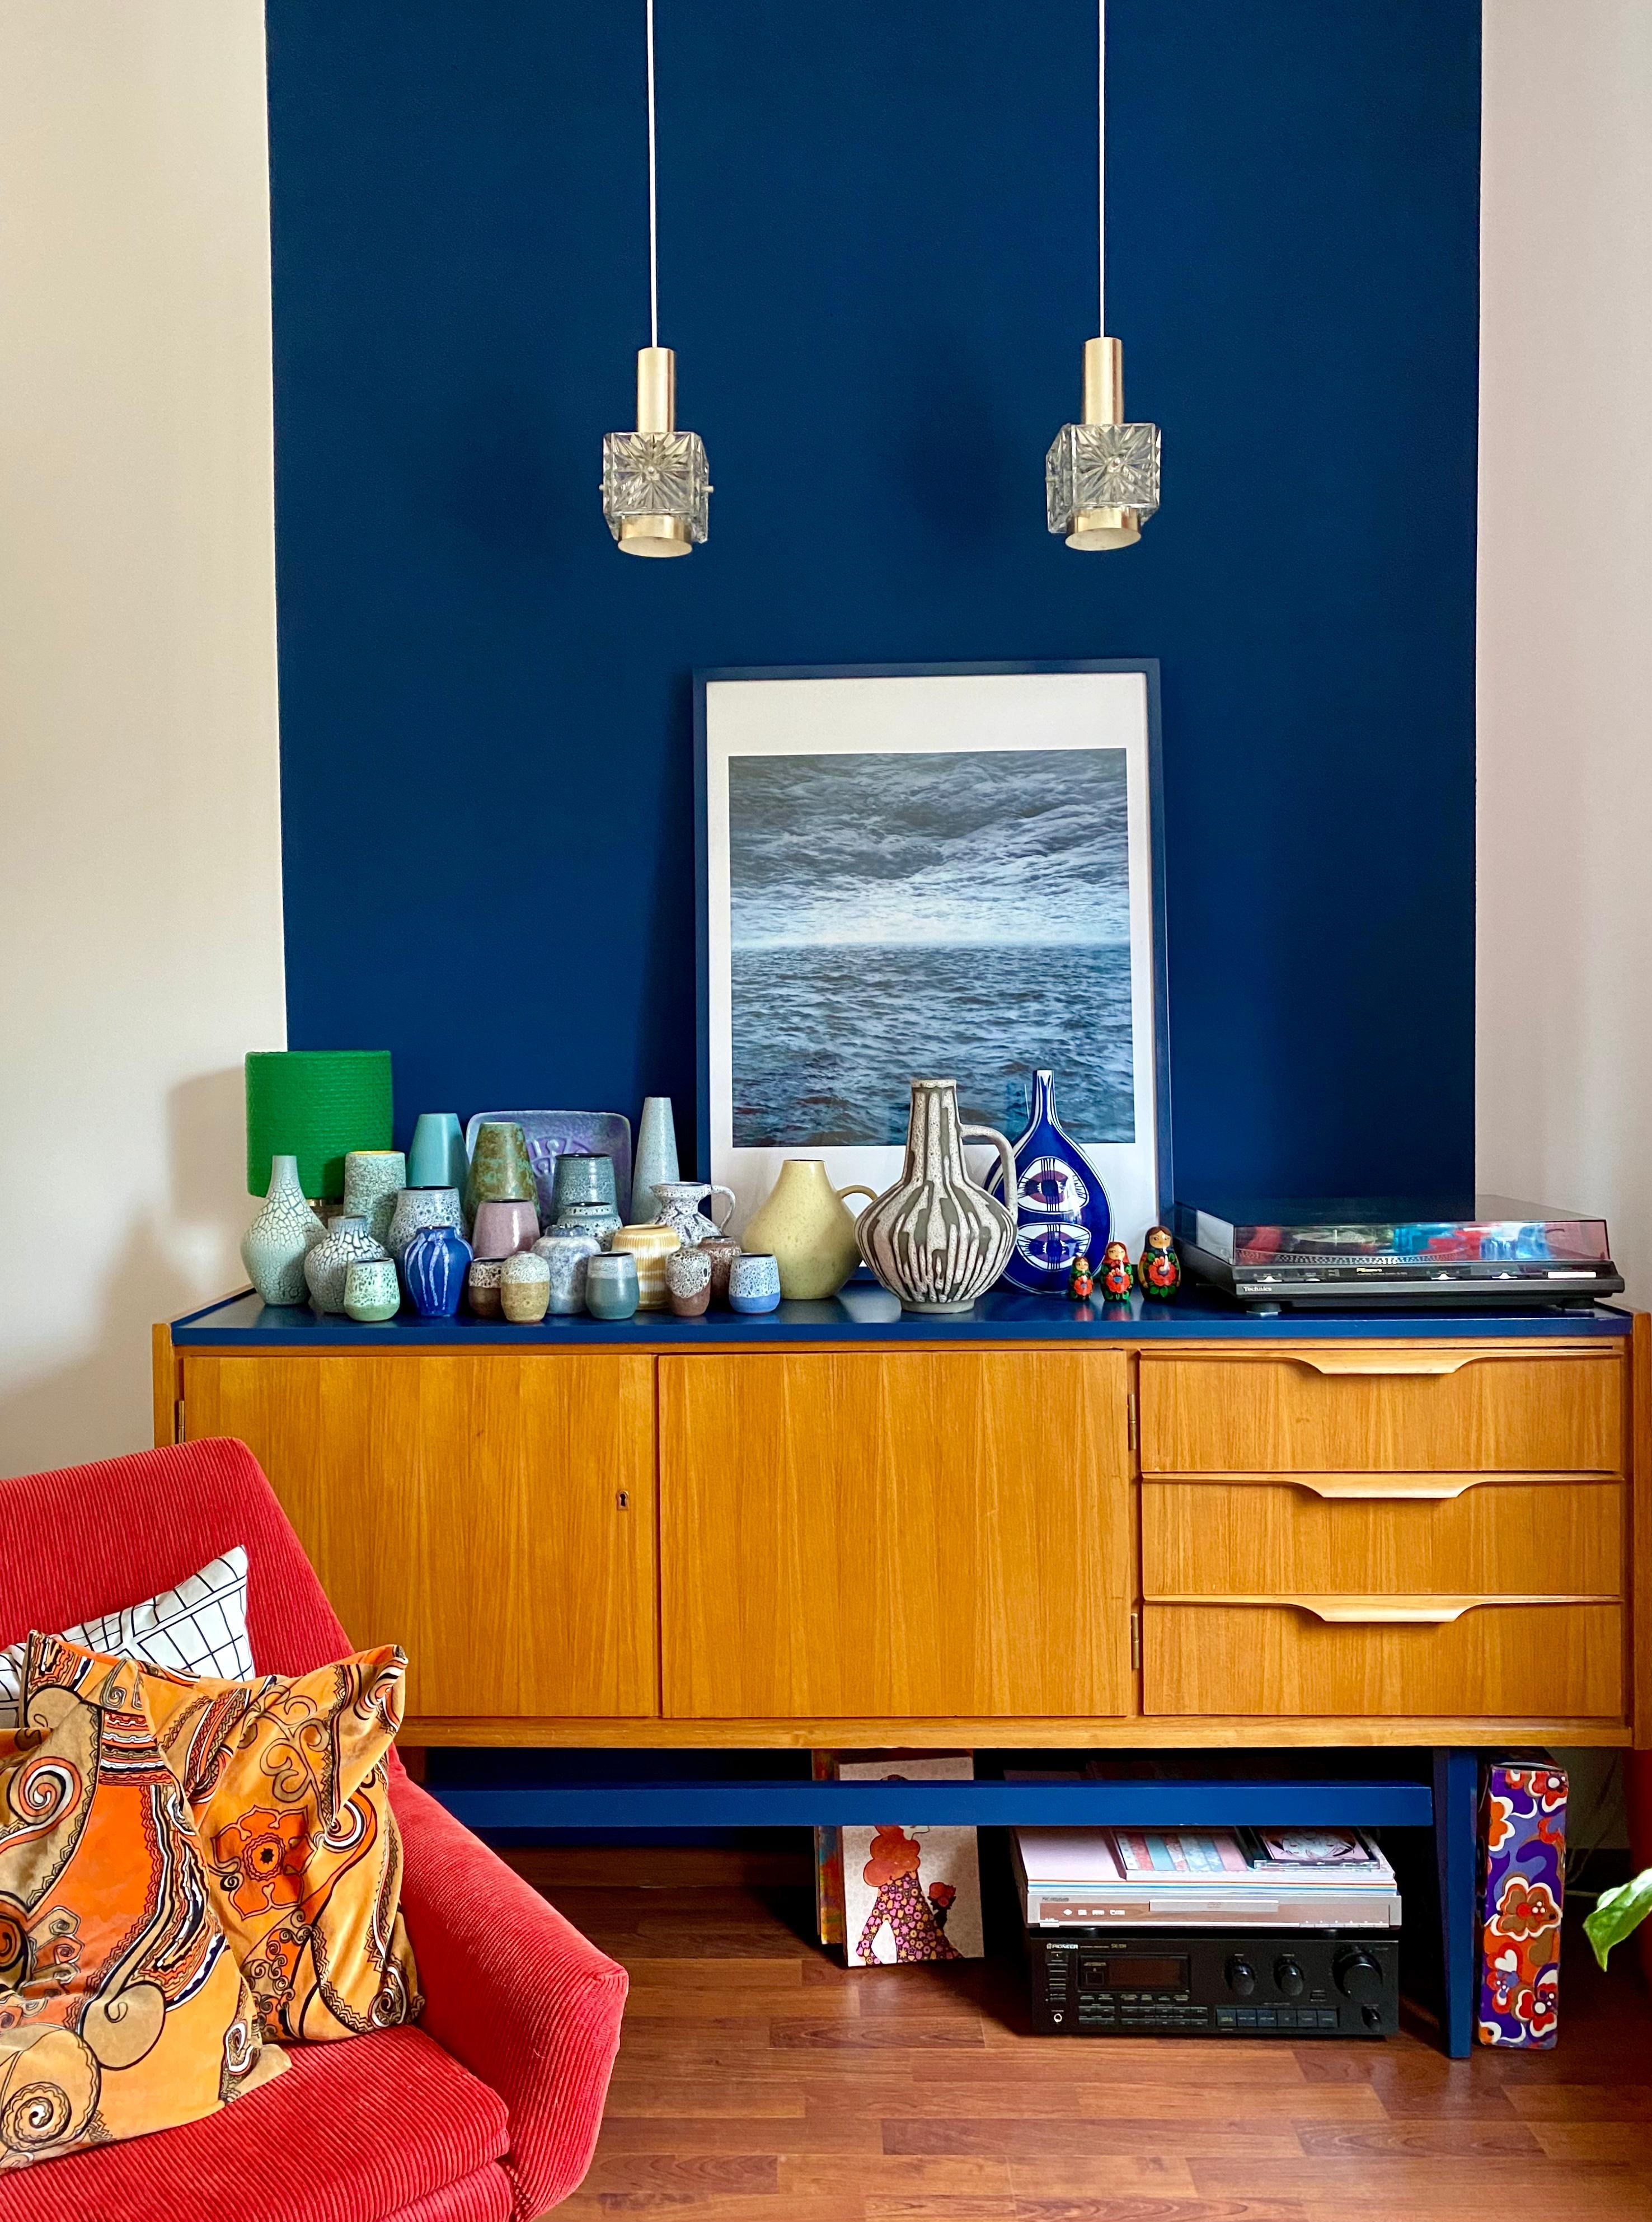 die neue Farbe im Arbeitszimmer 
#colorful #colorfulliving #couchstyle #colorfulinterior #blue